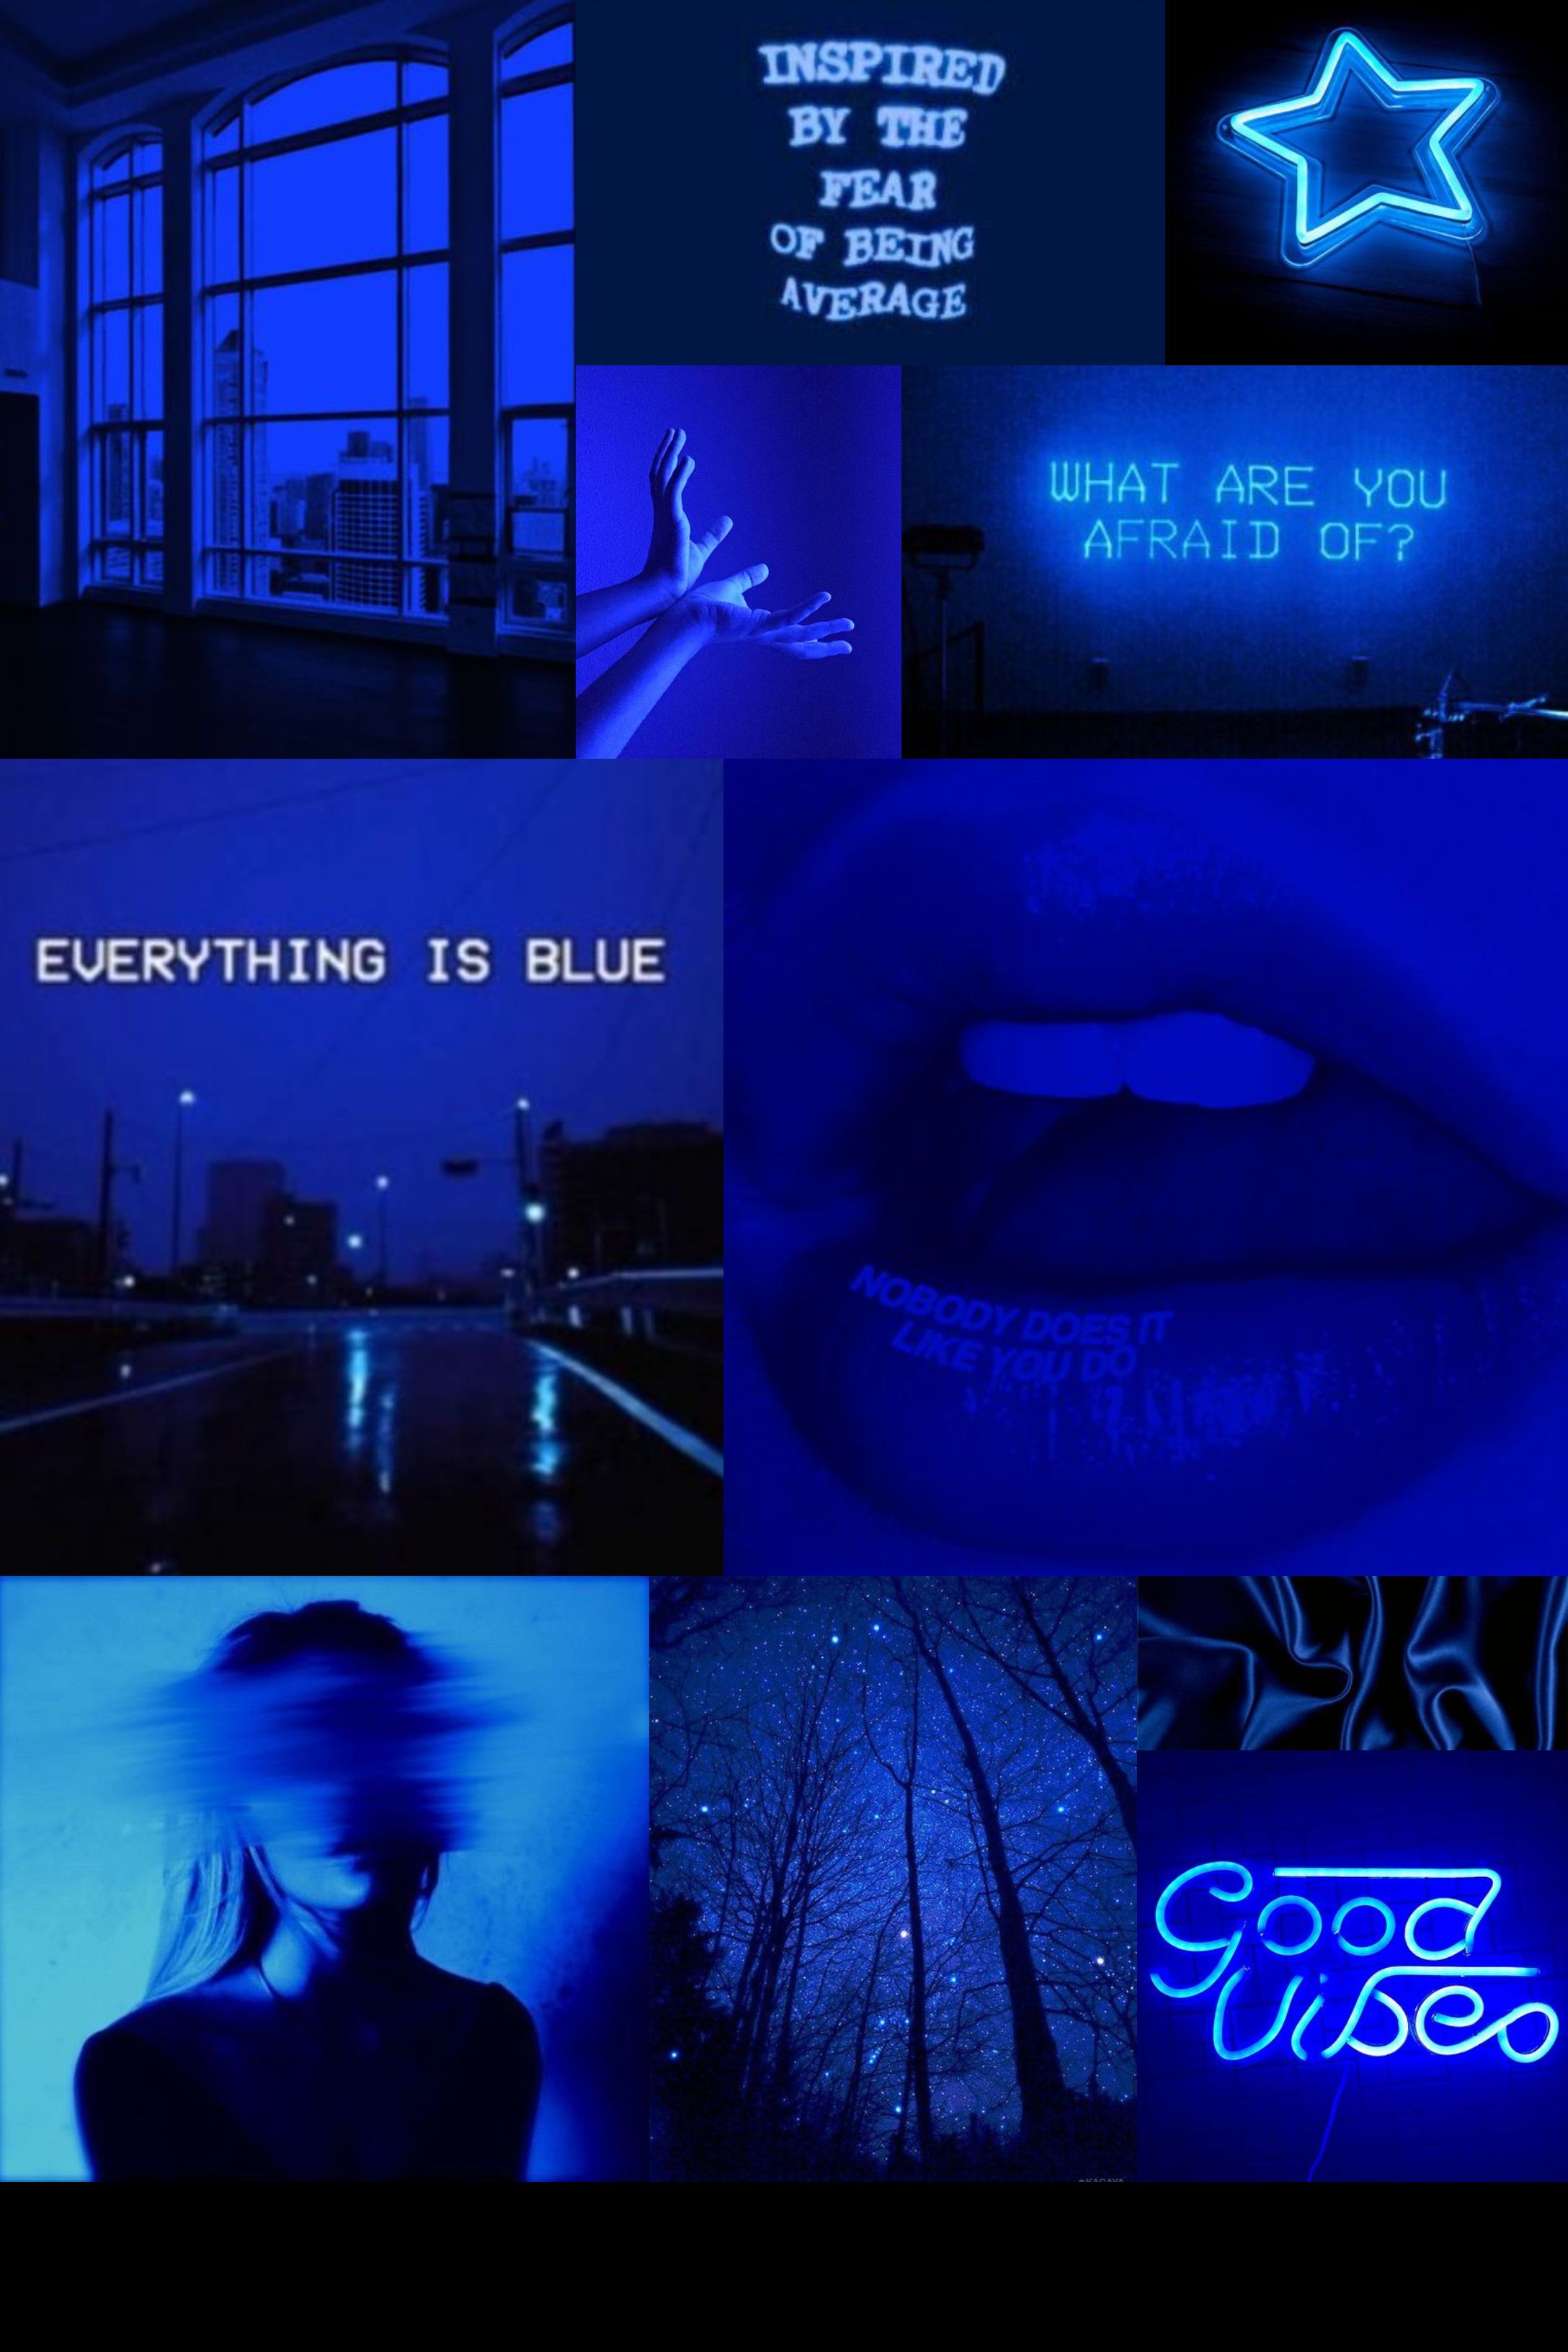 A collage of blue and black images - Dark blue, navy blue, neon blue